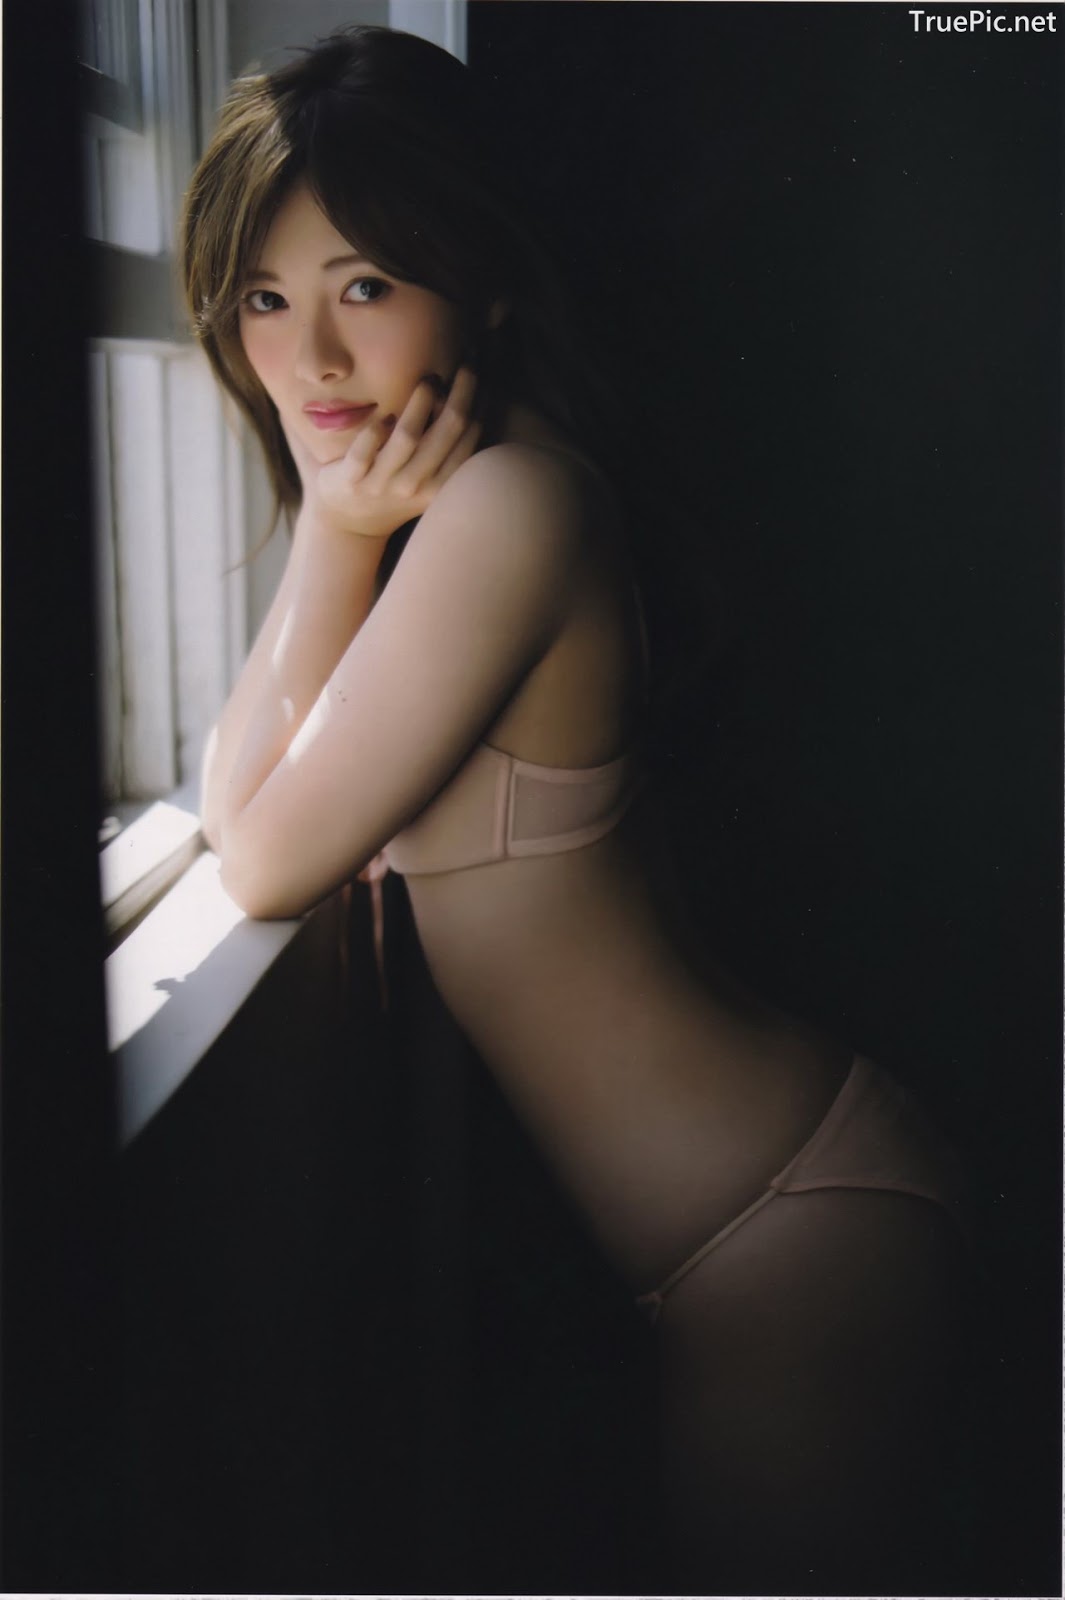 Image Japanese Singer And Model - Mai Shiraishi - Charming Beauty Of Angel - TruePic.net - Picture-34